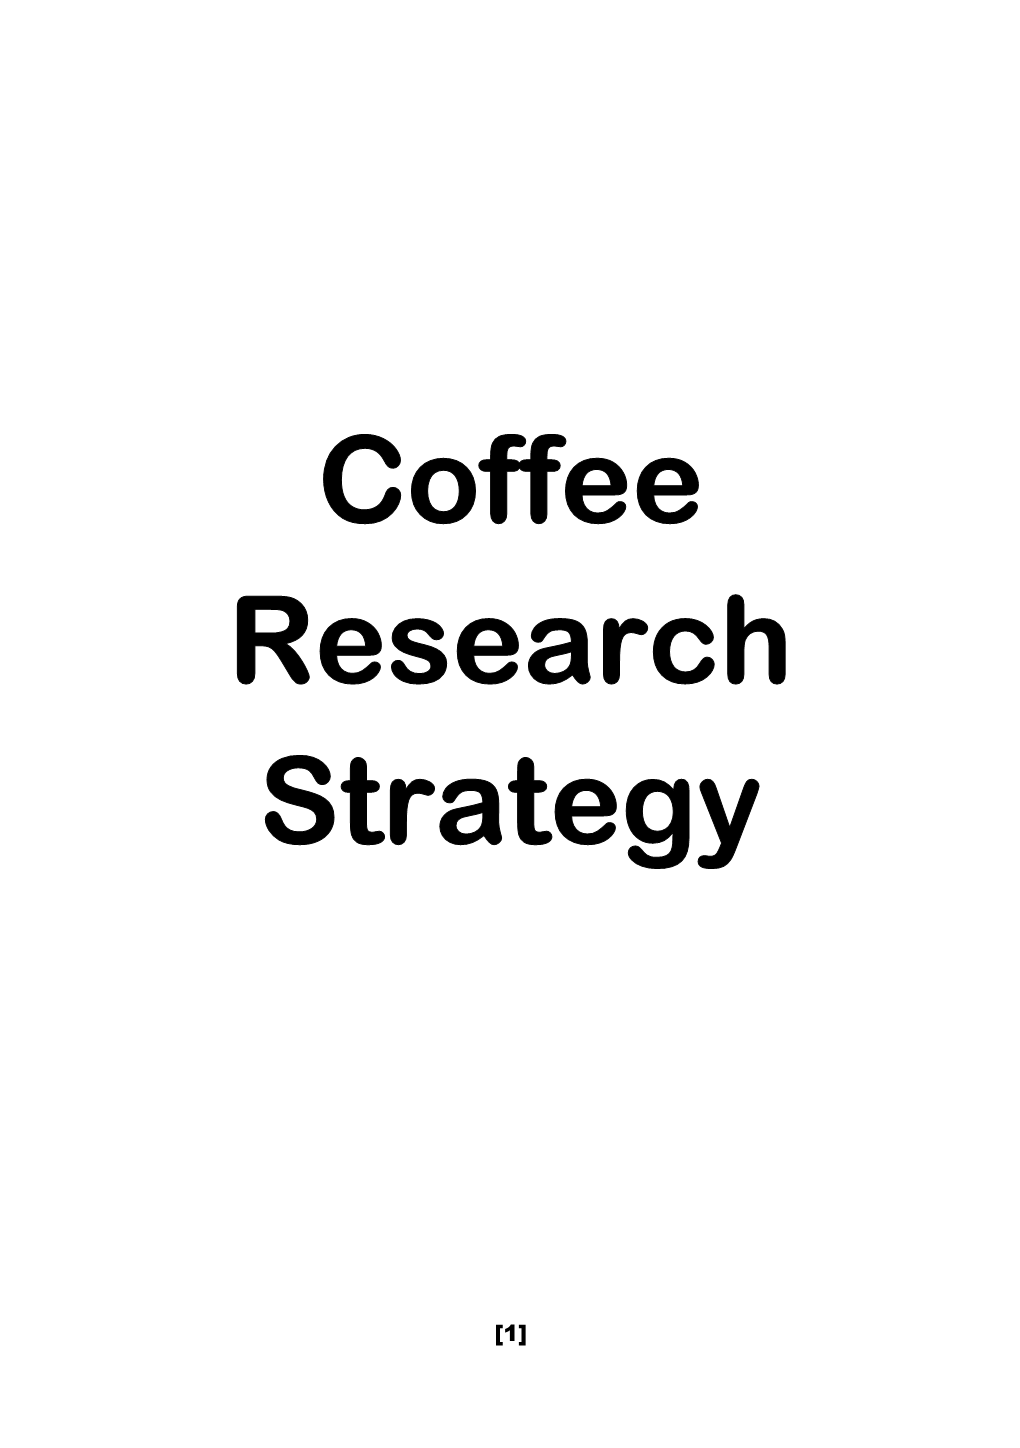 Coffee Research Strategy